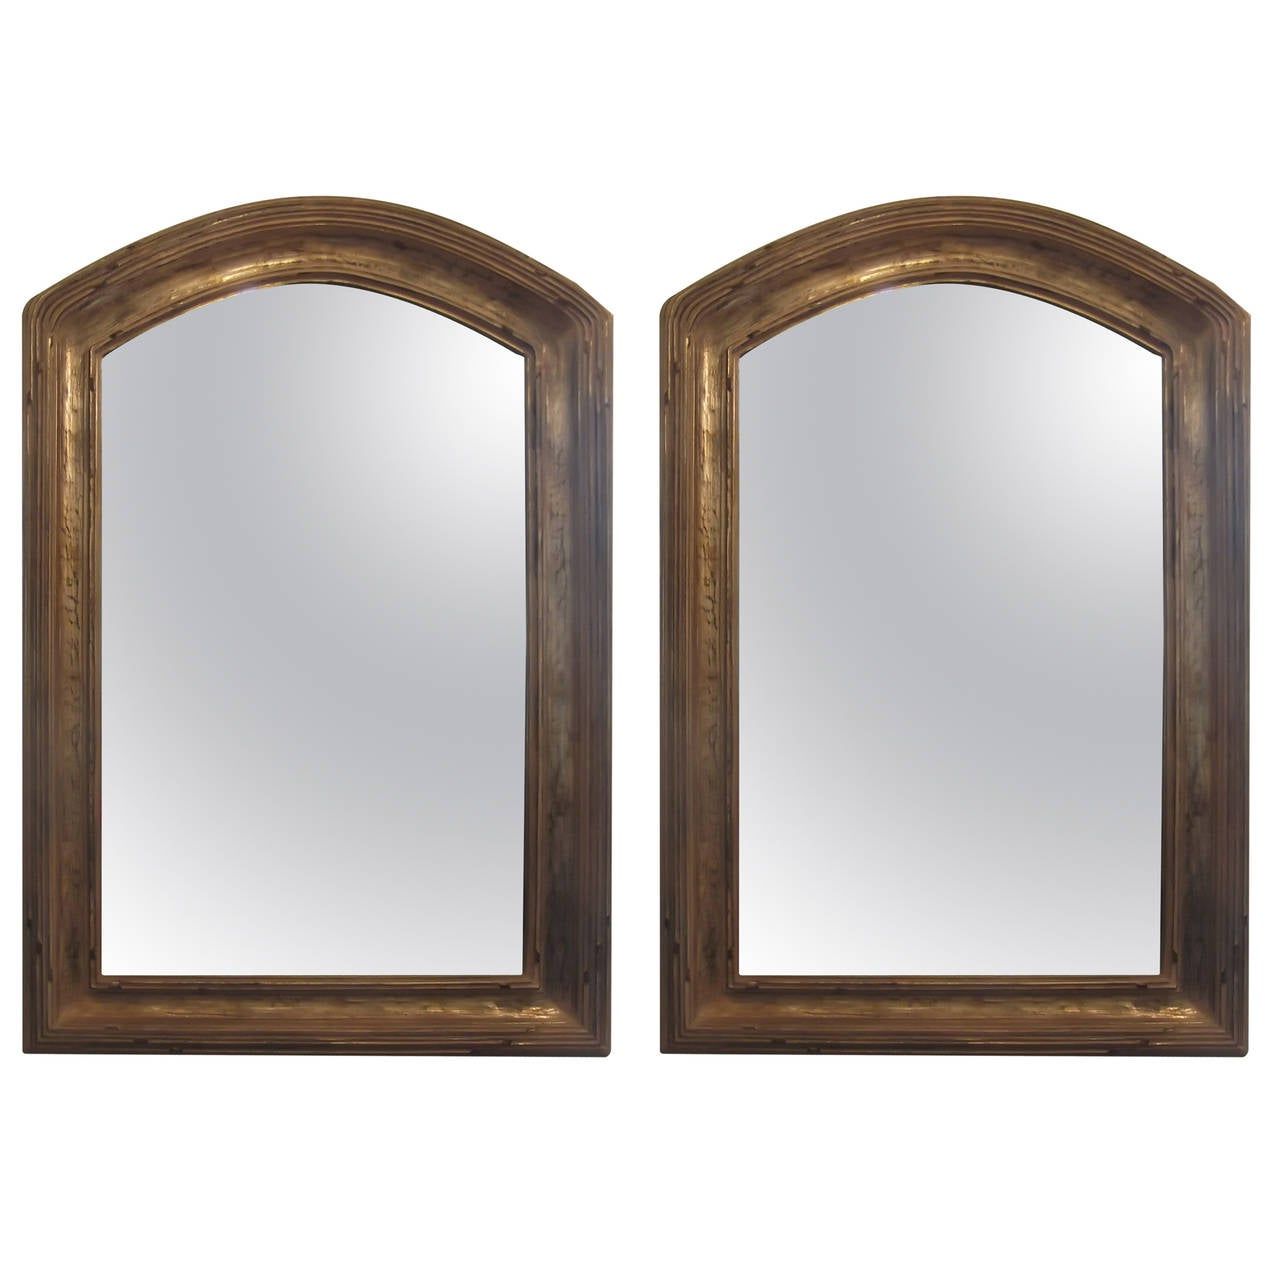 Widely Used Gold Arch Top Wall Mirrors Within Pair Of Giltwood Arched Top Mirrors At 1stdibs (View 7 of 15)